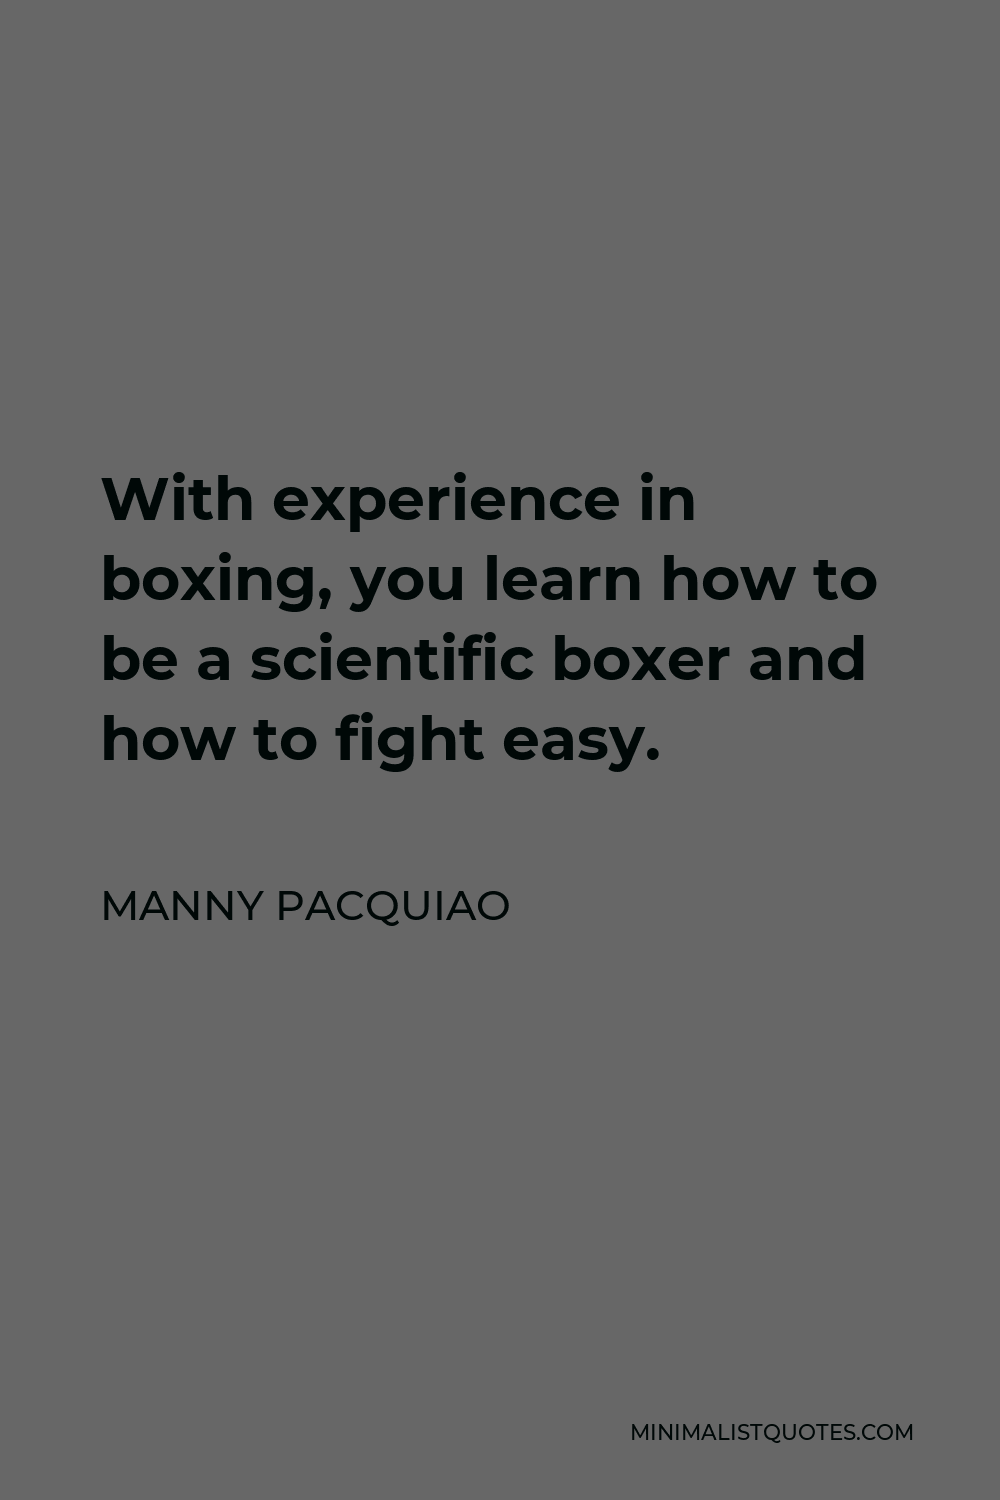 Manny Pacquiao Quote - With experience in boxing, you learn how to be a scientific boxer and how to fight easy.